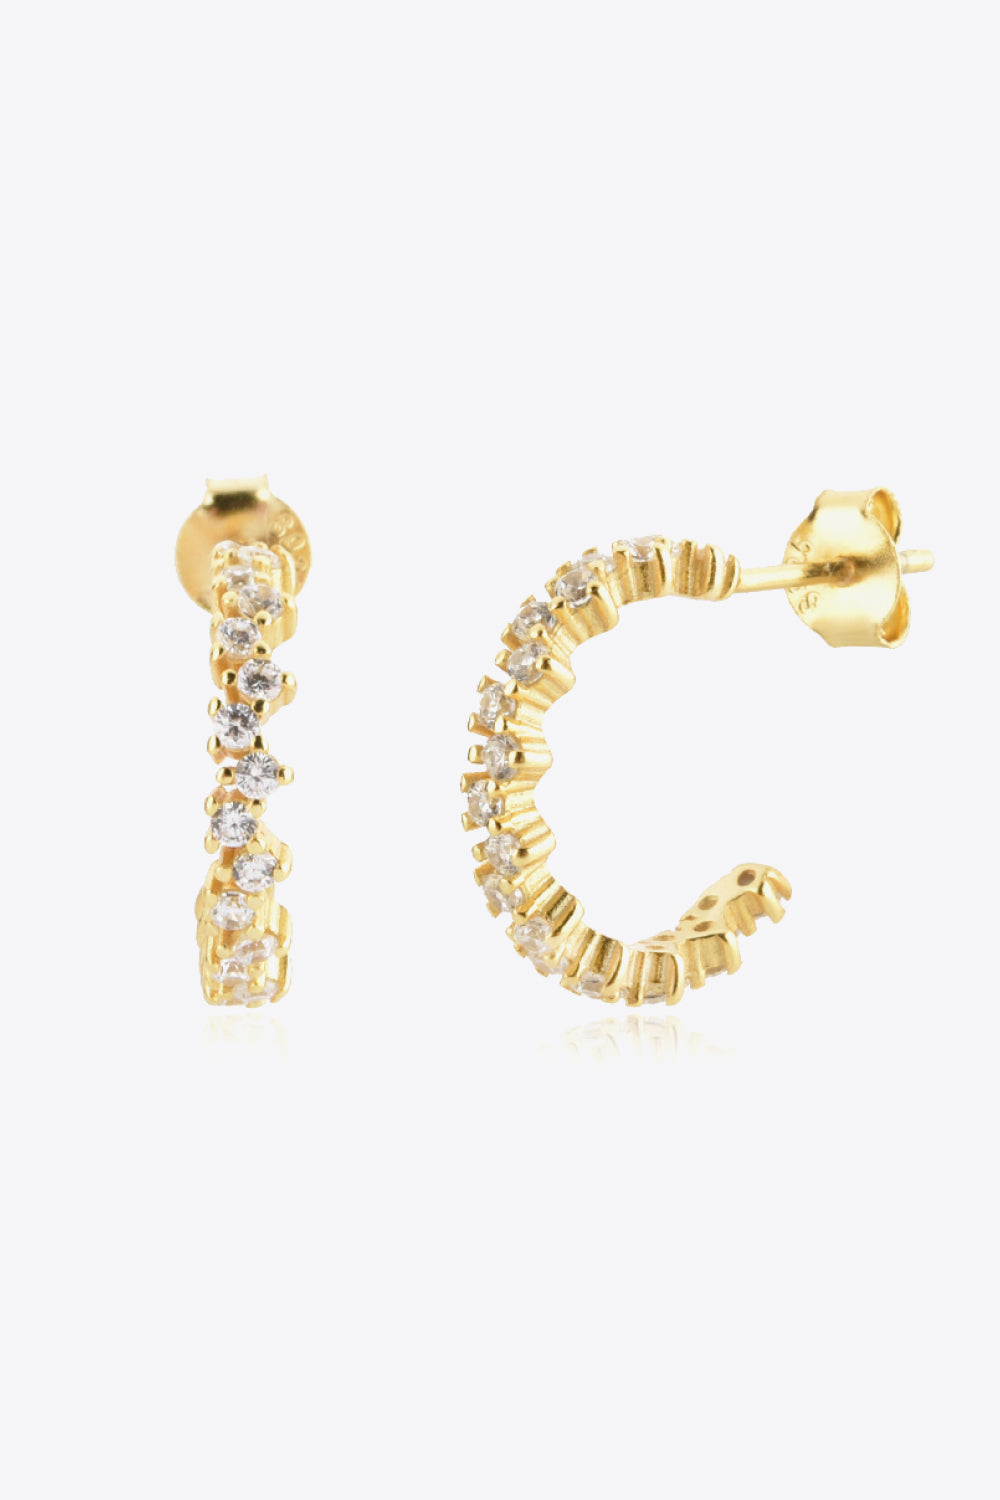 Imported C-Hoop Earrings: Stylish hoop-shaped earrings that have been imported, adding a touch of international flair to your jewelry collection.